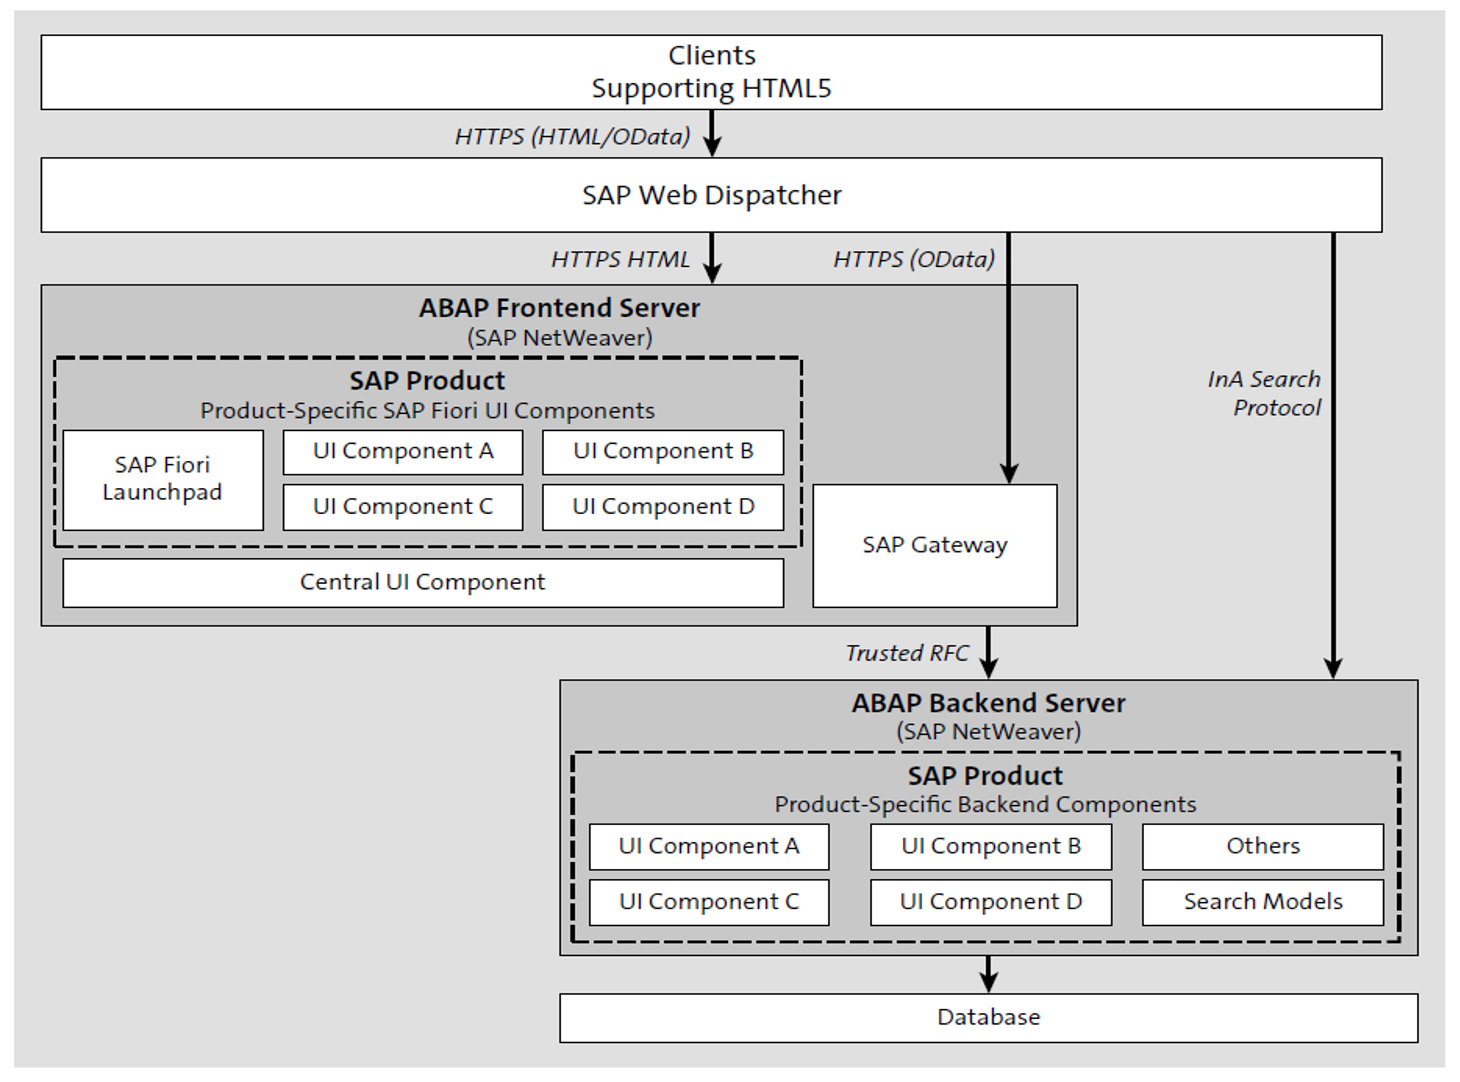 Typical Landscape for SAP Fiori on an SAP Business Suite System